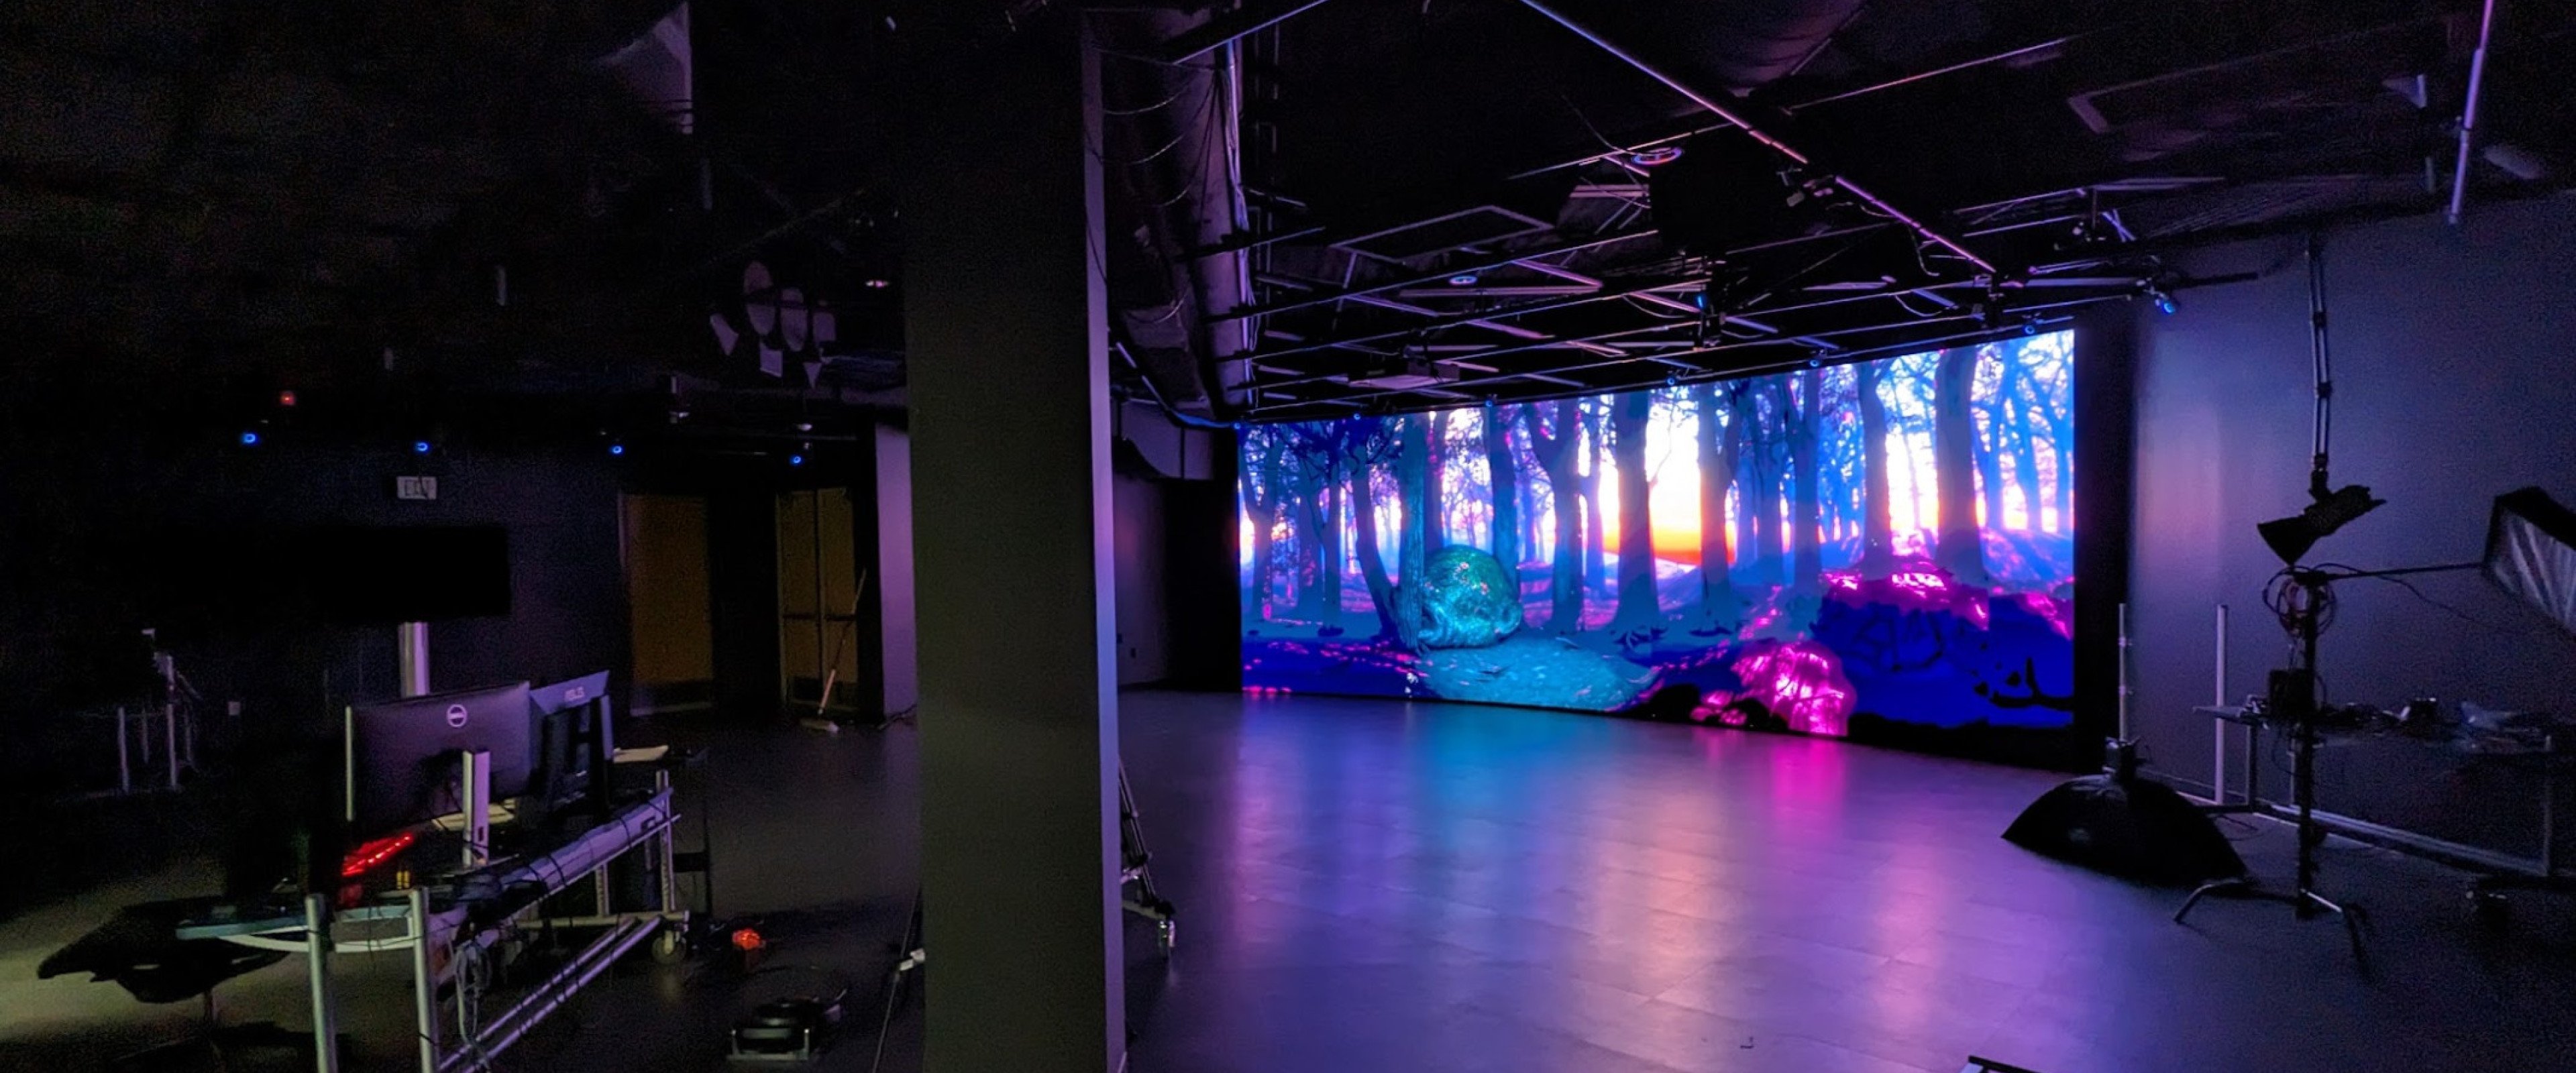 Blue and purple 3D animated forest scene displayed on LED wall with lights off. Surrounding main studio space shows performance area, lighting instruments, PCs and various monitors.